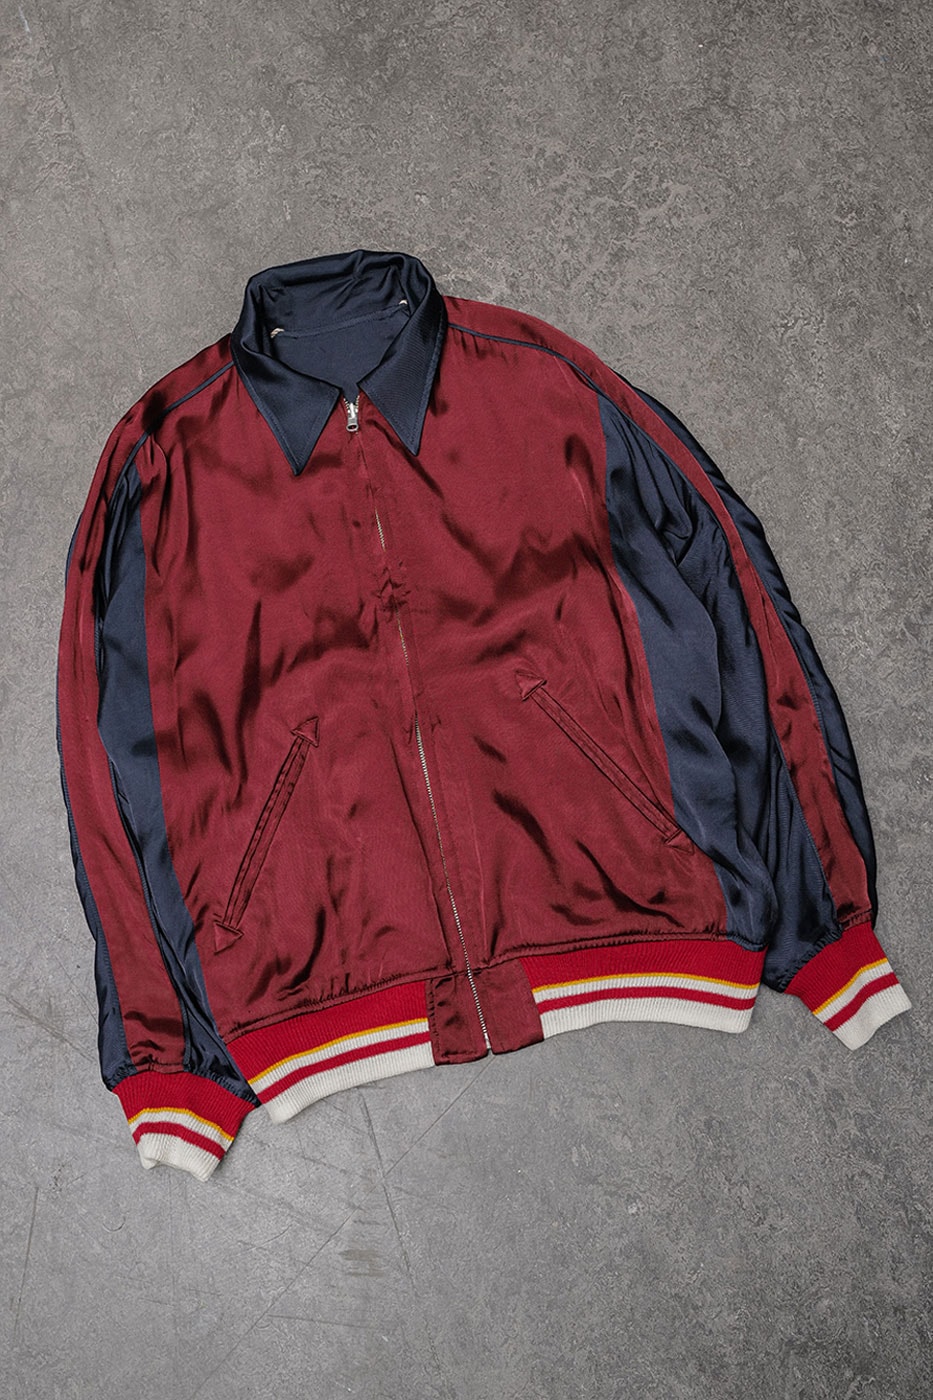 BEAMS x Columbia New Archive-Inspired Collab